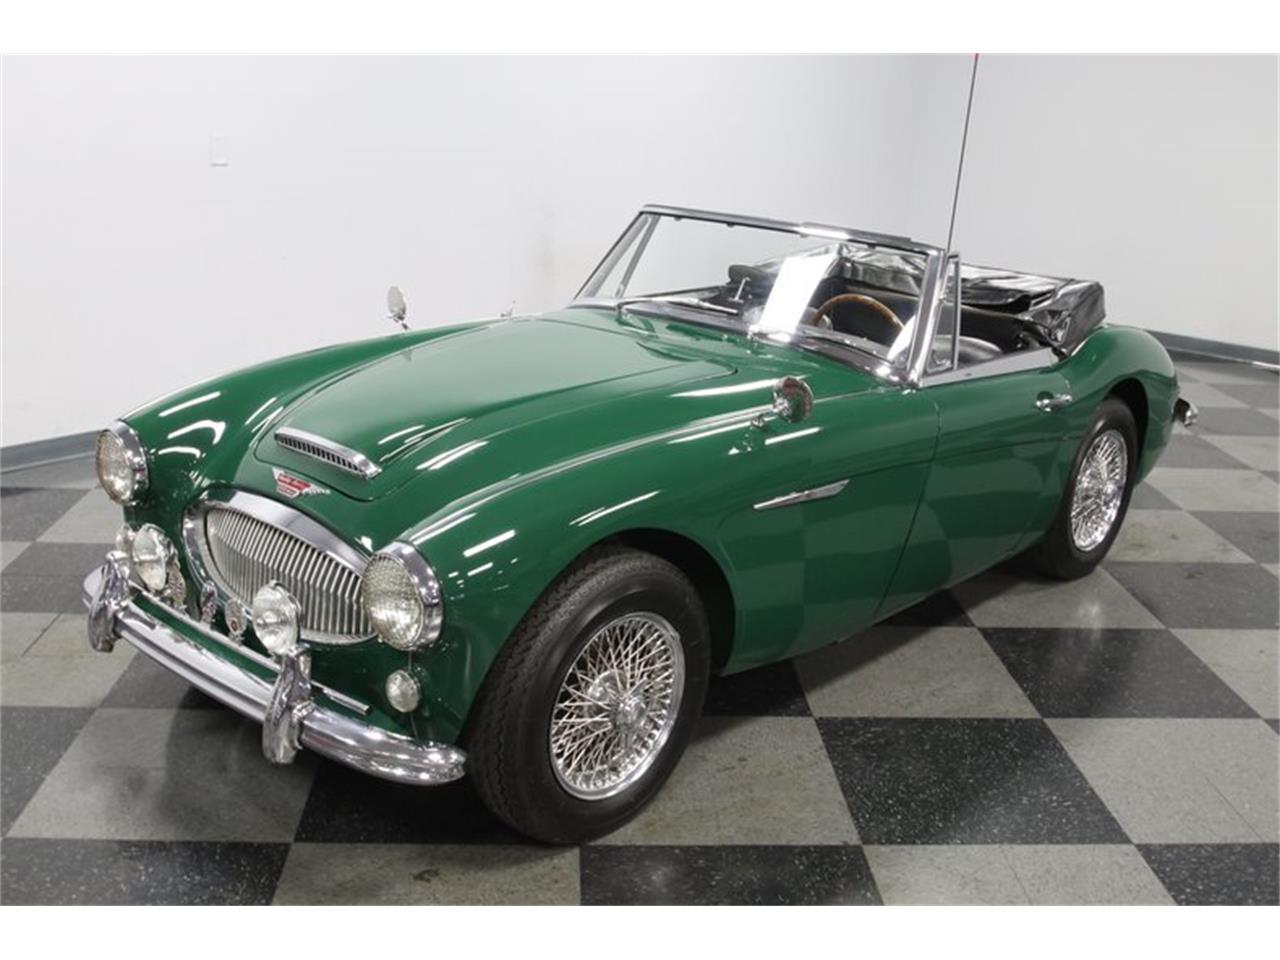 1965 Austin-Healey 3000 Mark III BJ8 for sale in Concord ...